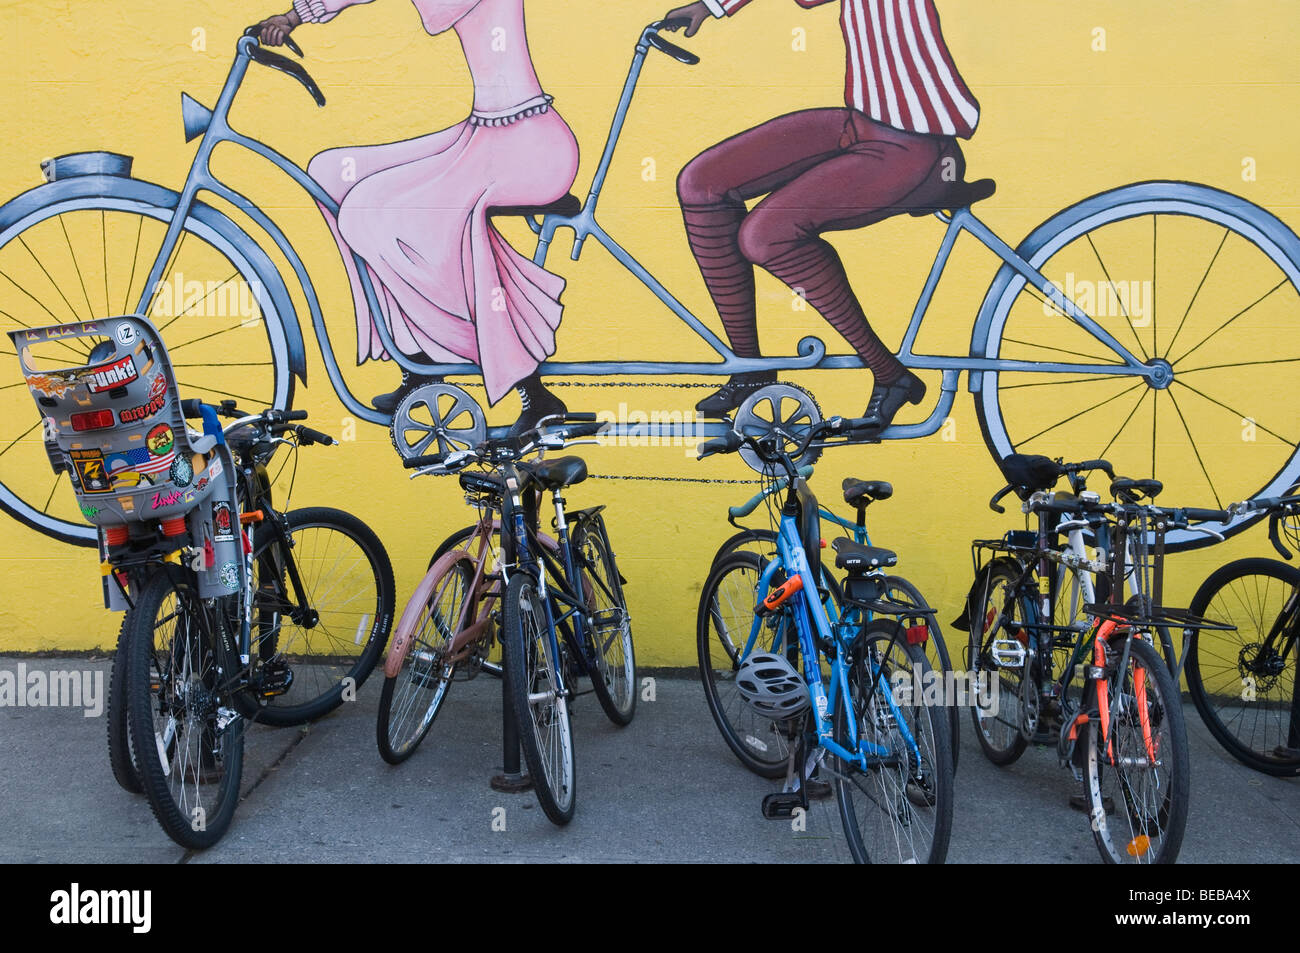 Bicycles lined up on bicycle racks, Brooklyn, New York, USA. Stock Photo